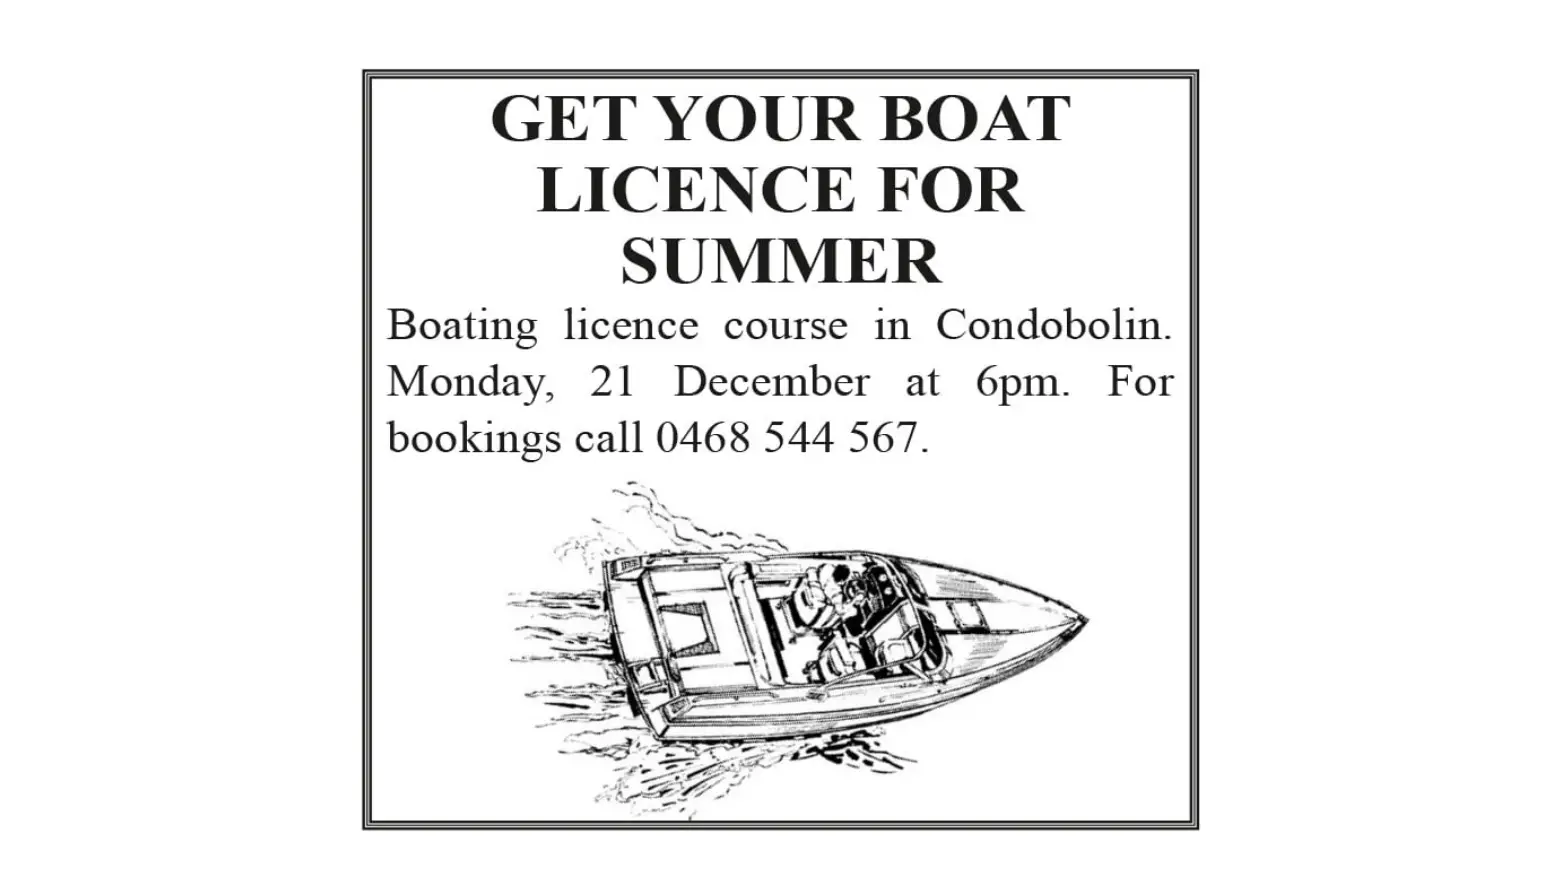 GET YOUR BOAT LICENCE FOR SUMMER!